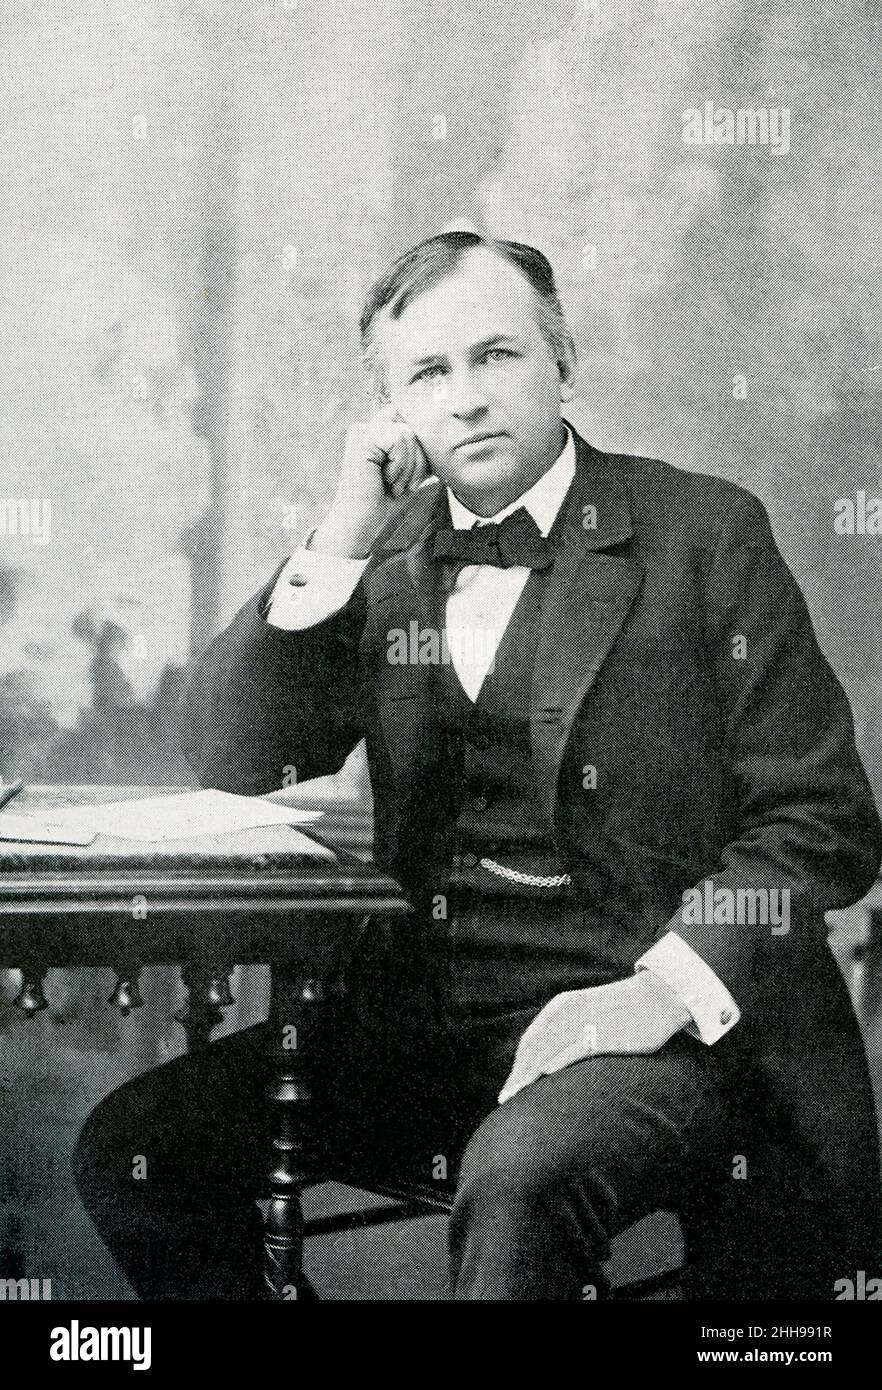 This 1891 image shows John Wannamaker, a religious, civic and political figure, considered by some to be a proponent of advertising and a 'pioneer in marketing'. He was born in Philadelphia, Pennsylvania, and served as U.S. Postmaster General during the term of U.S. President Benjamin Harrison from 1889 to 1893. Wanamaker was an innovator, creative in his work, a merchandising genius, and proponent of the power of advertising, though modest and with an enduring reputation for honesty. Although he did not invent the fixed price system, he is credited for the creation of the price tag; he popula Stock Photo